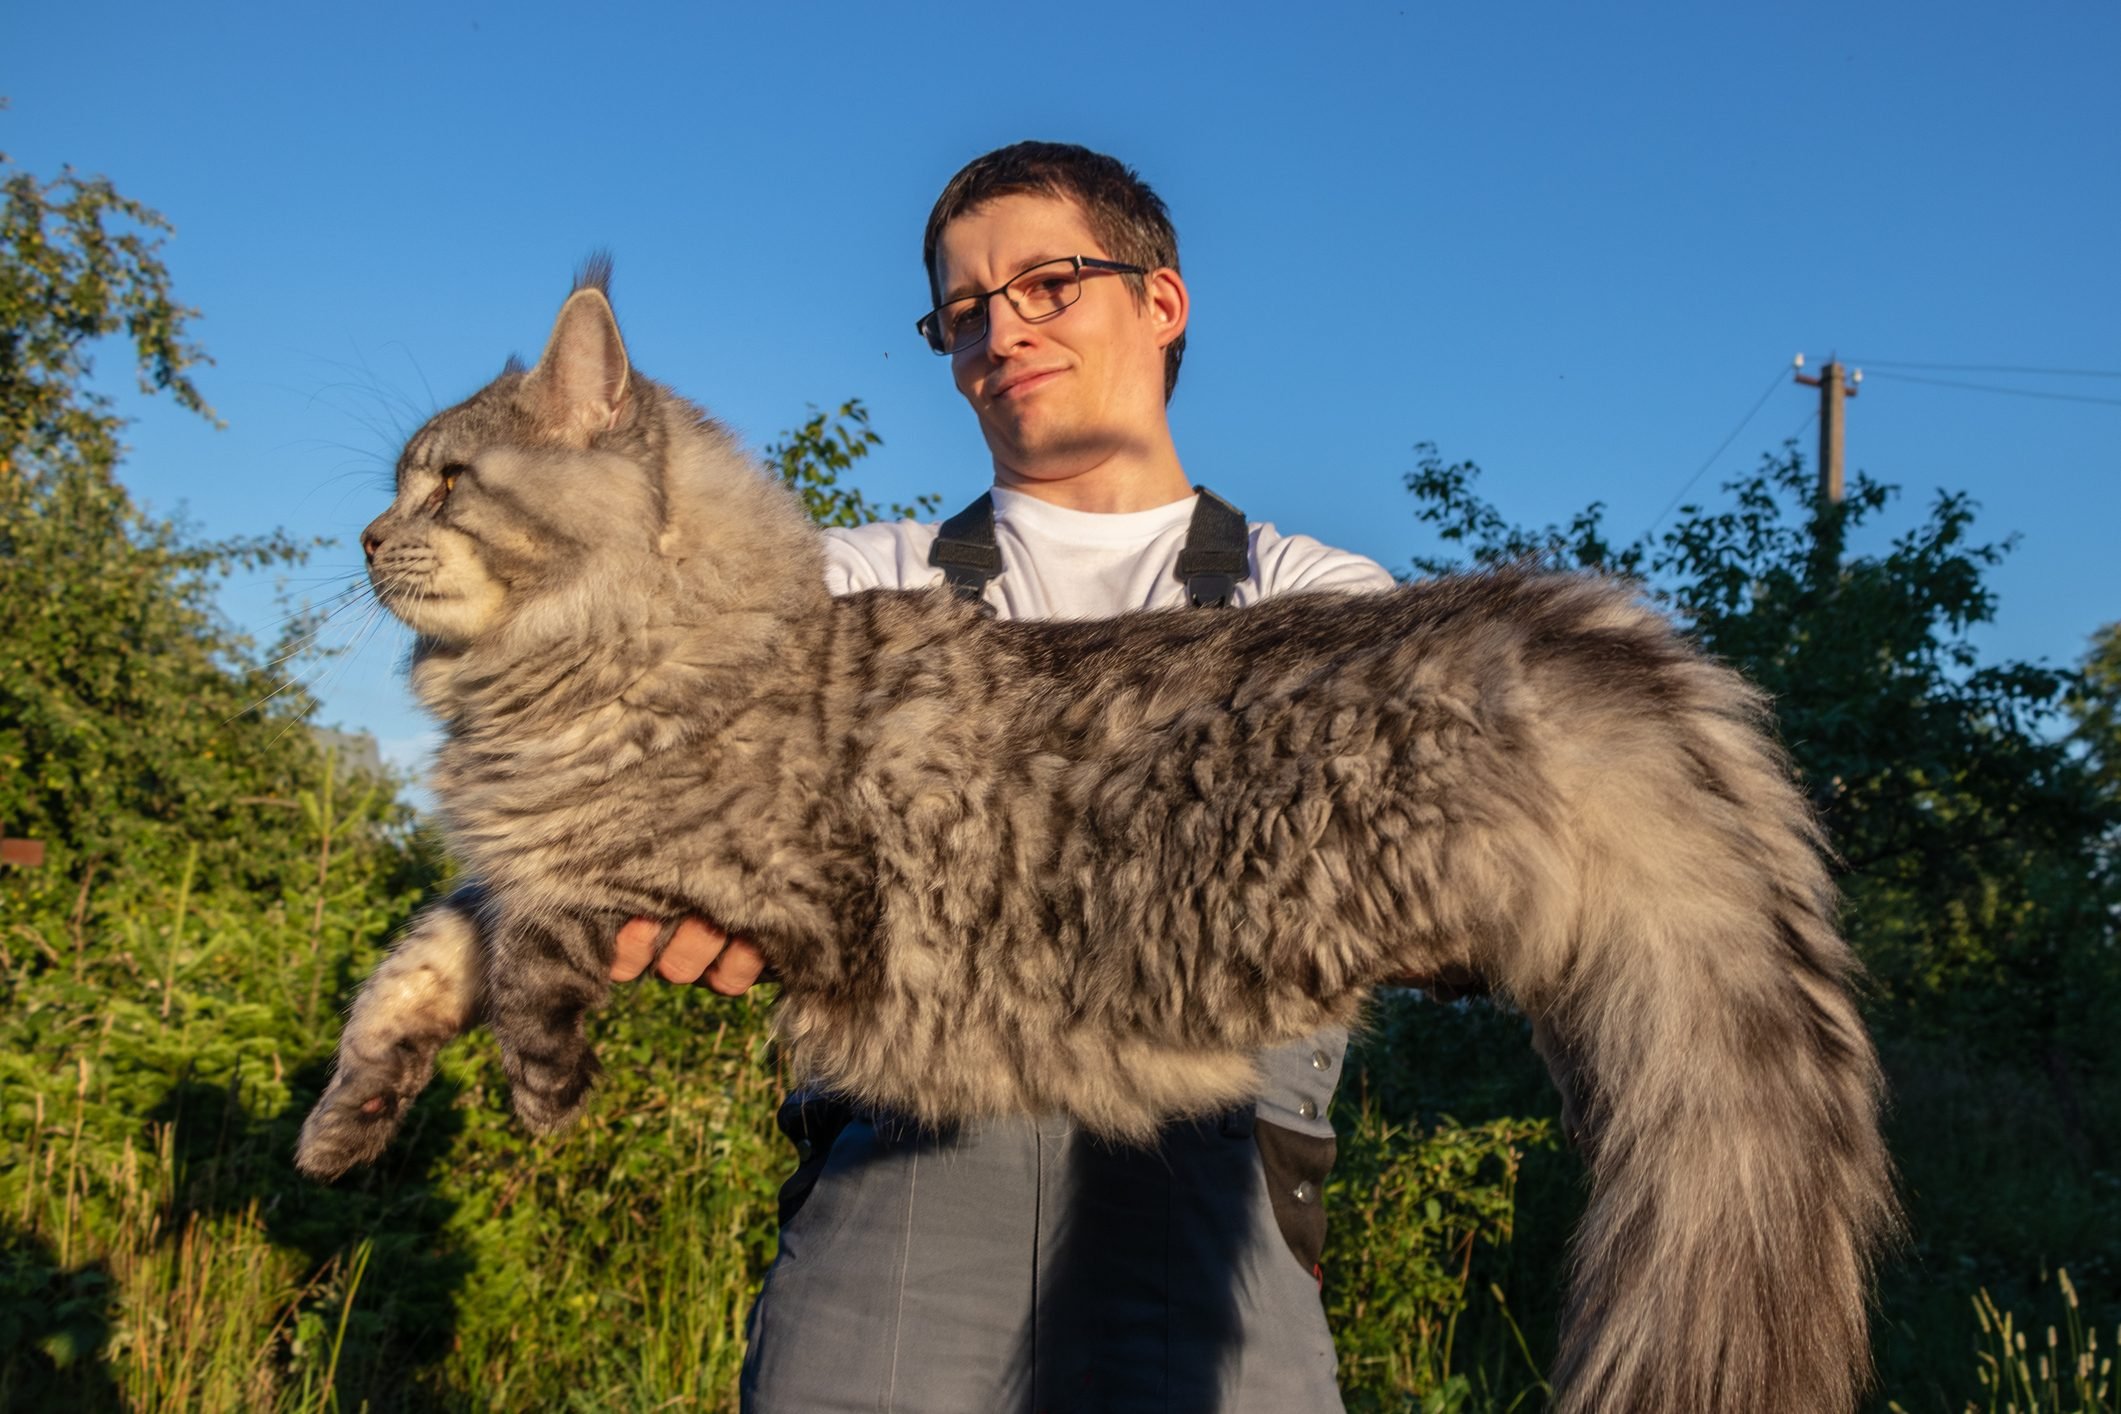 A man wearing glasses and overalls is holding a huge, gray Maine Coon cat